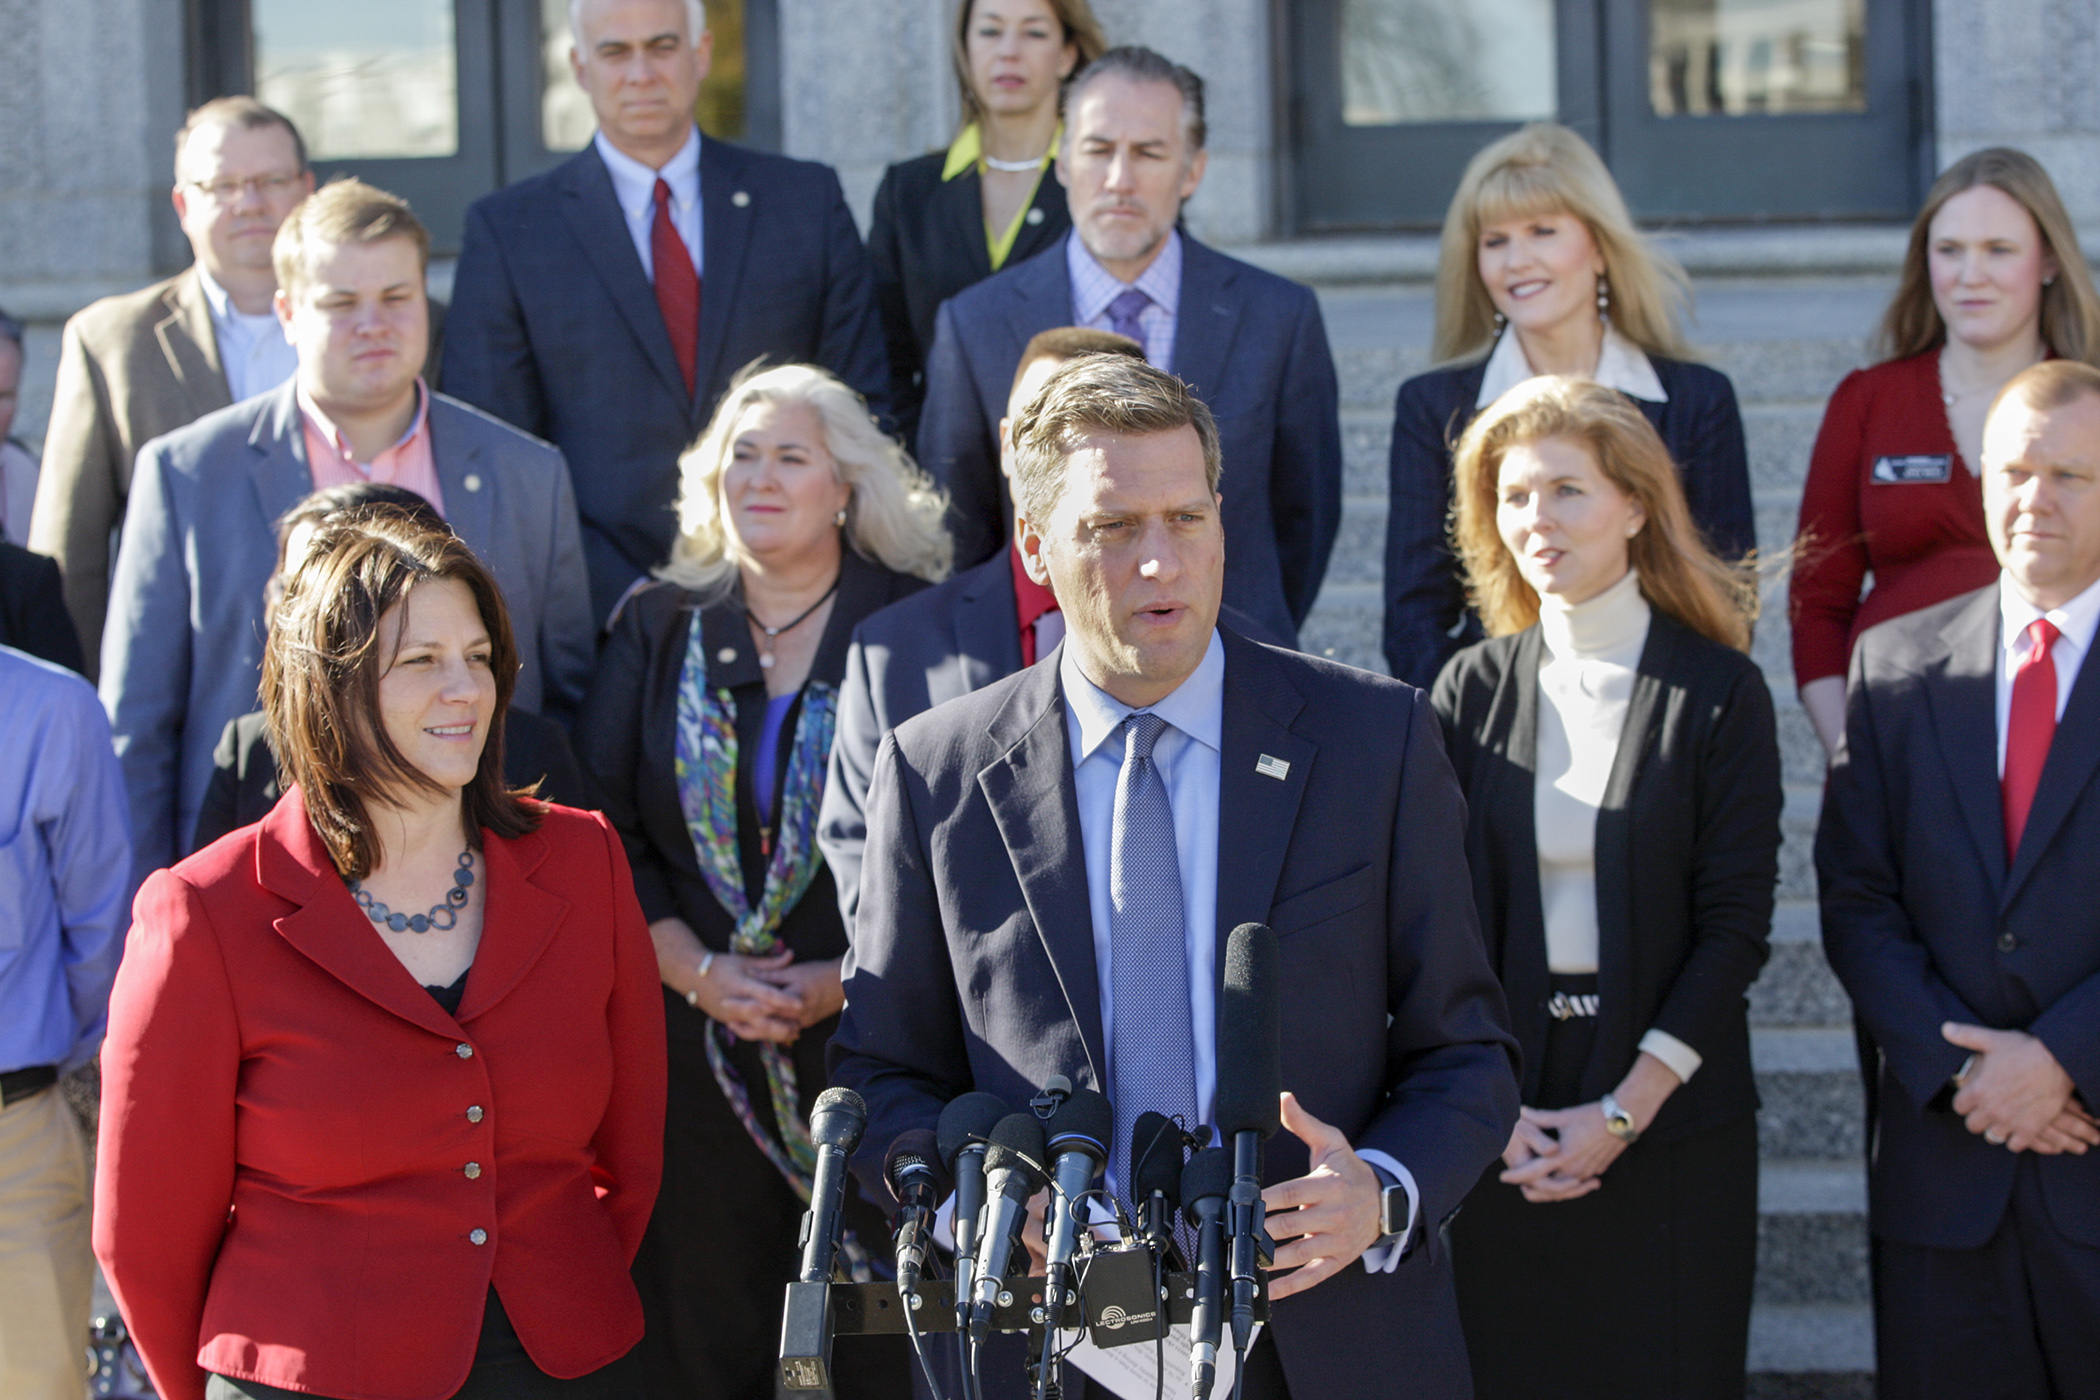 House Speaker Kurt Daudt addresses the media on the steps of the State Office Building Nov. 9. Republicans retained control of the House on Election Night. Photo by Paul Battaglia